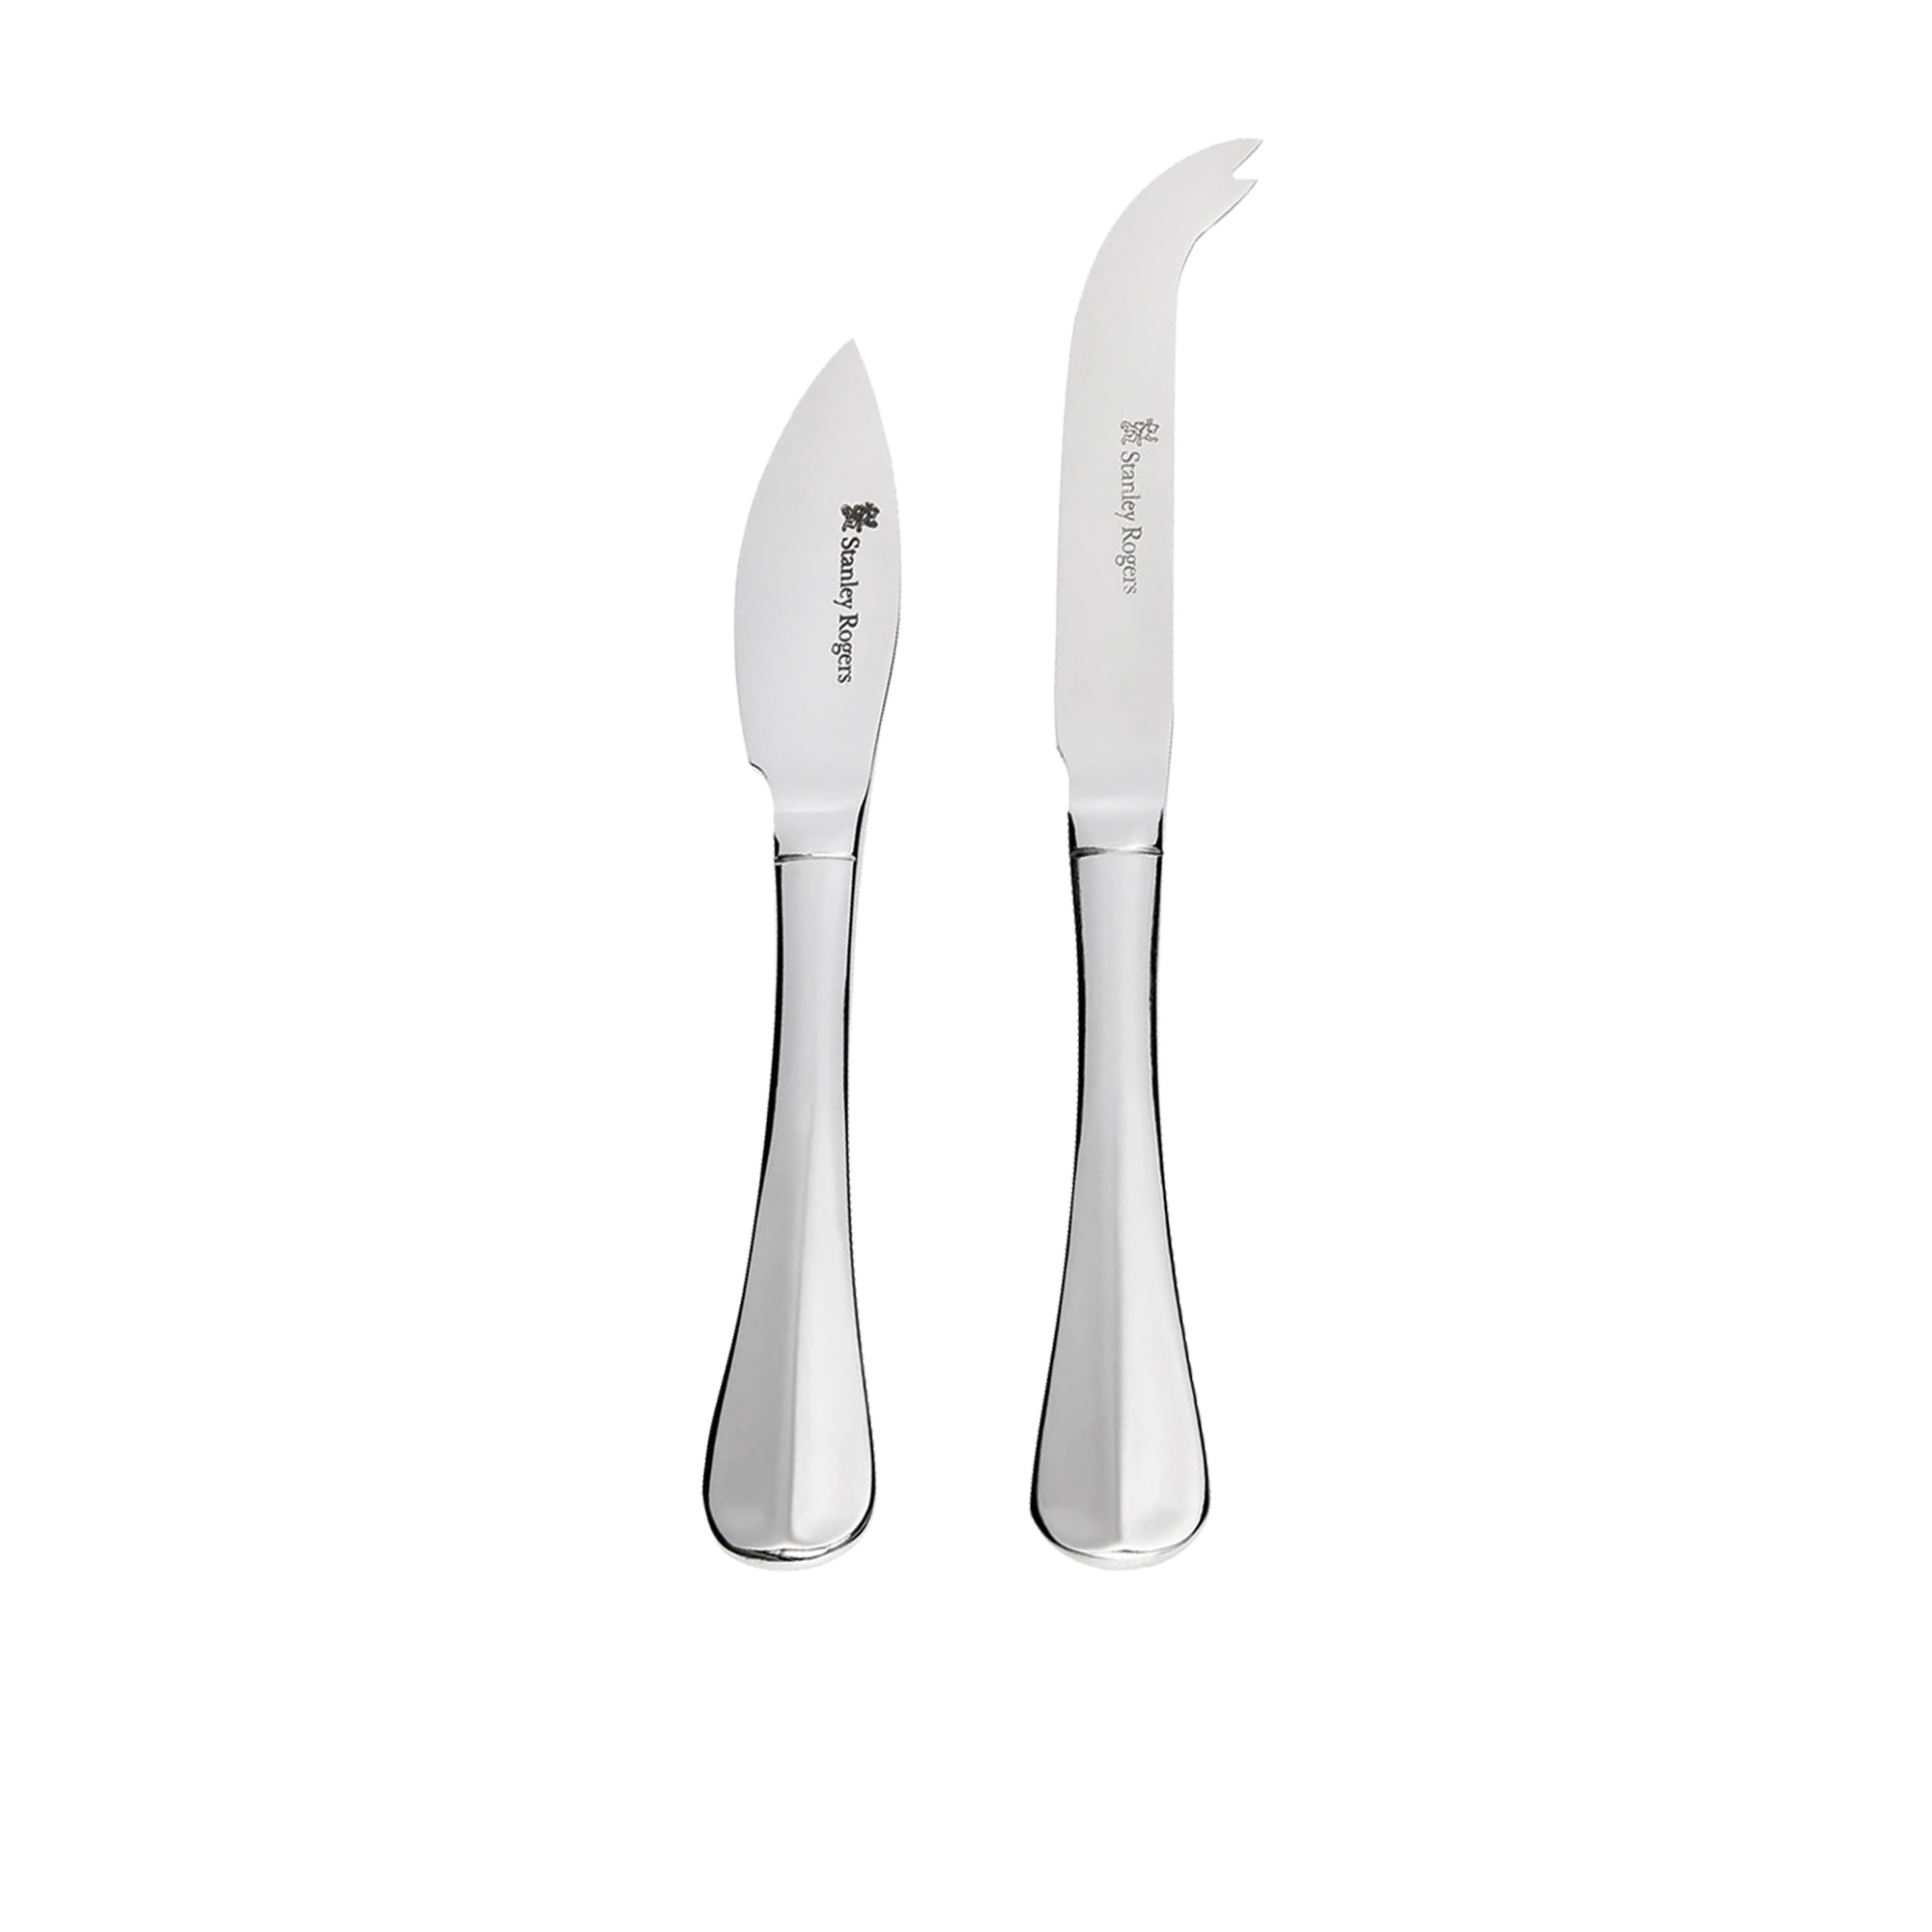 Stanley Rogers Baguette Cheese Knife Set 2pc Image 1